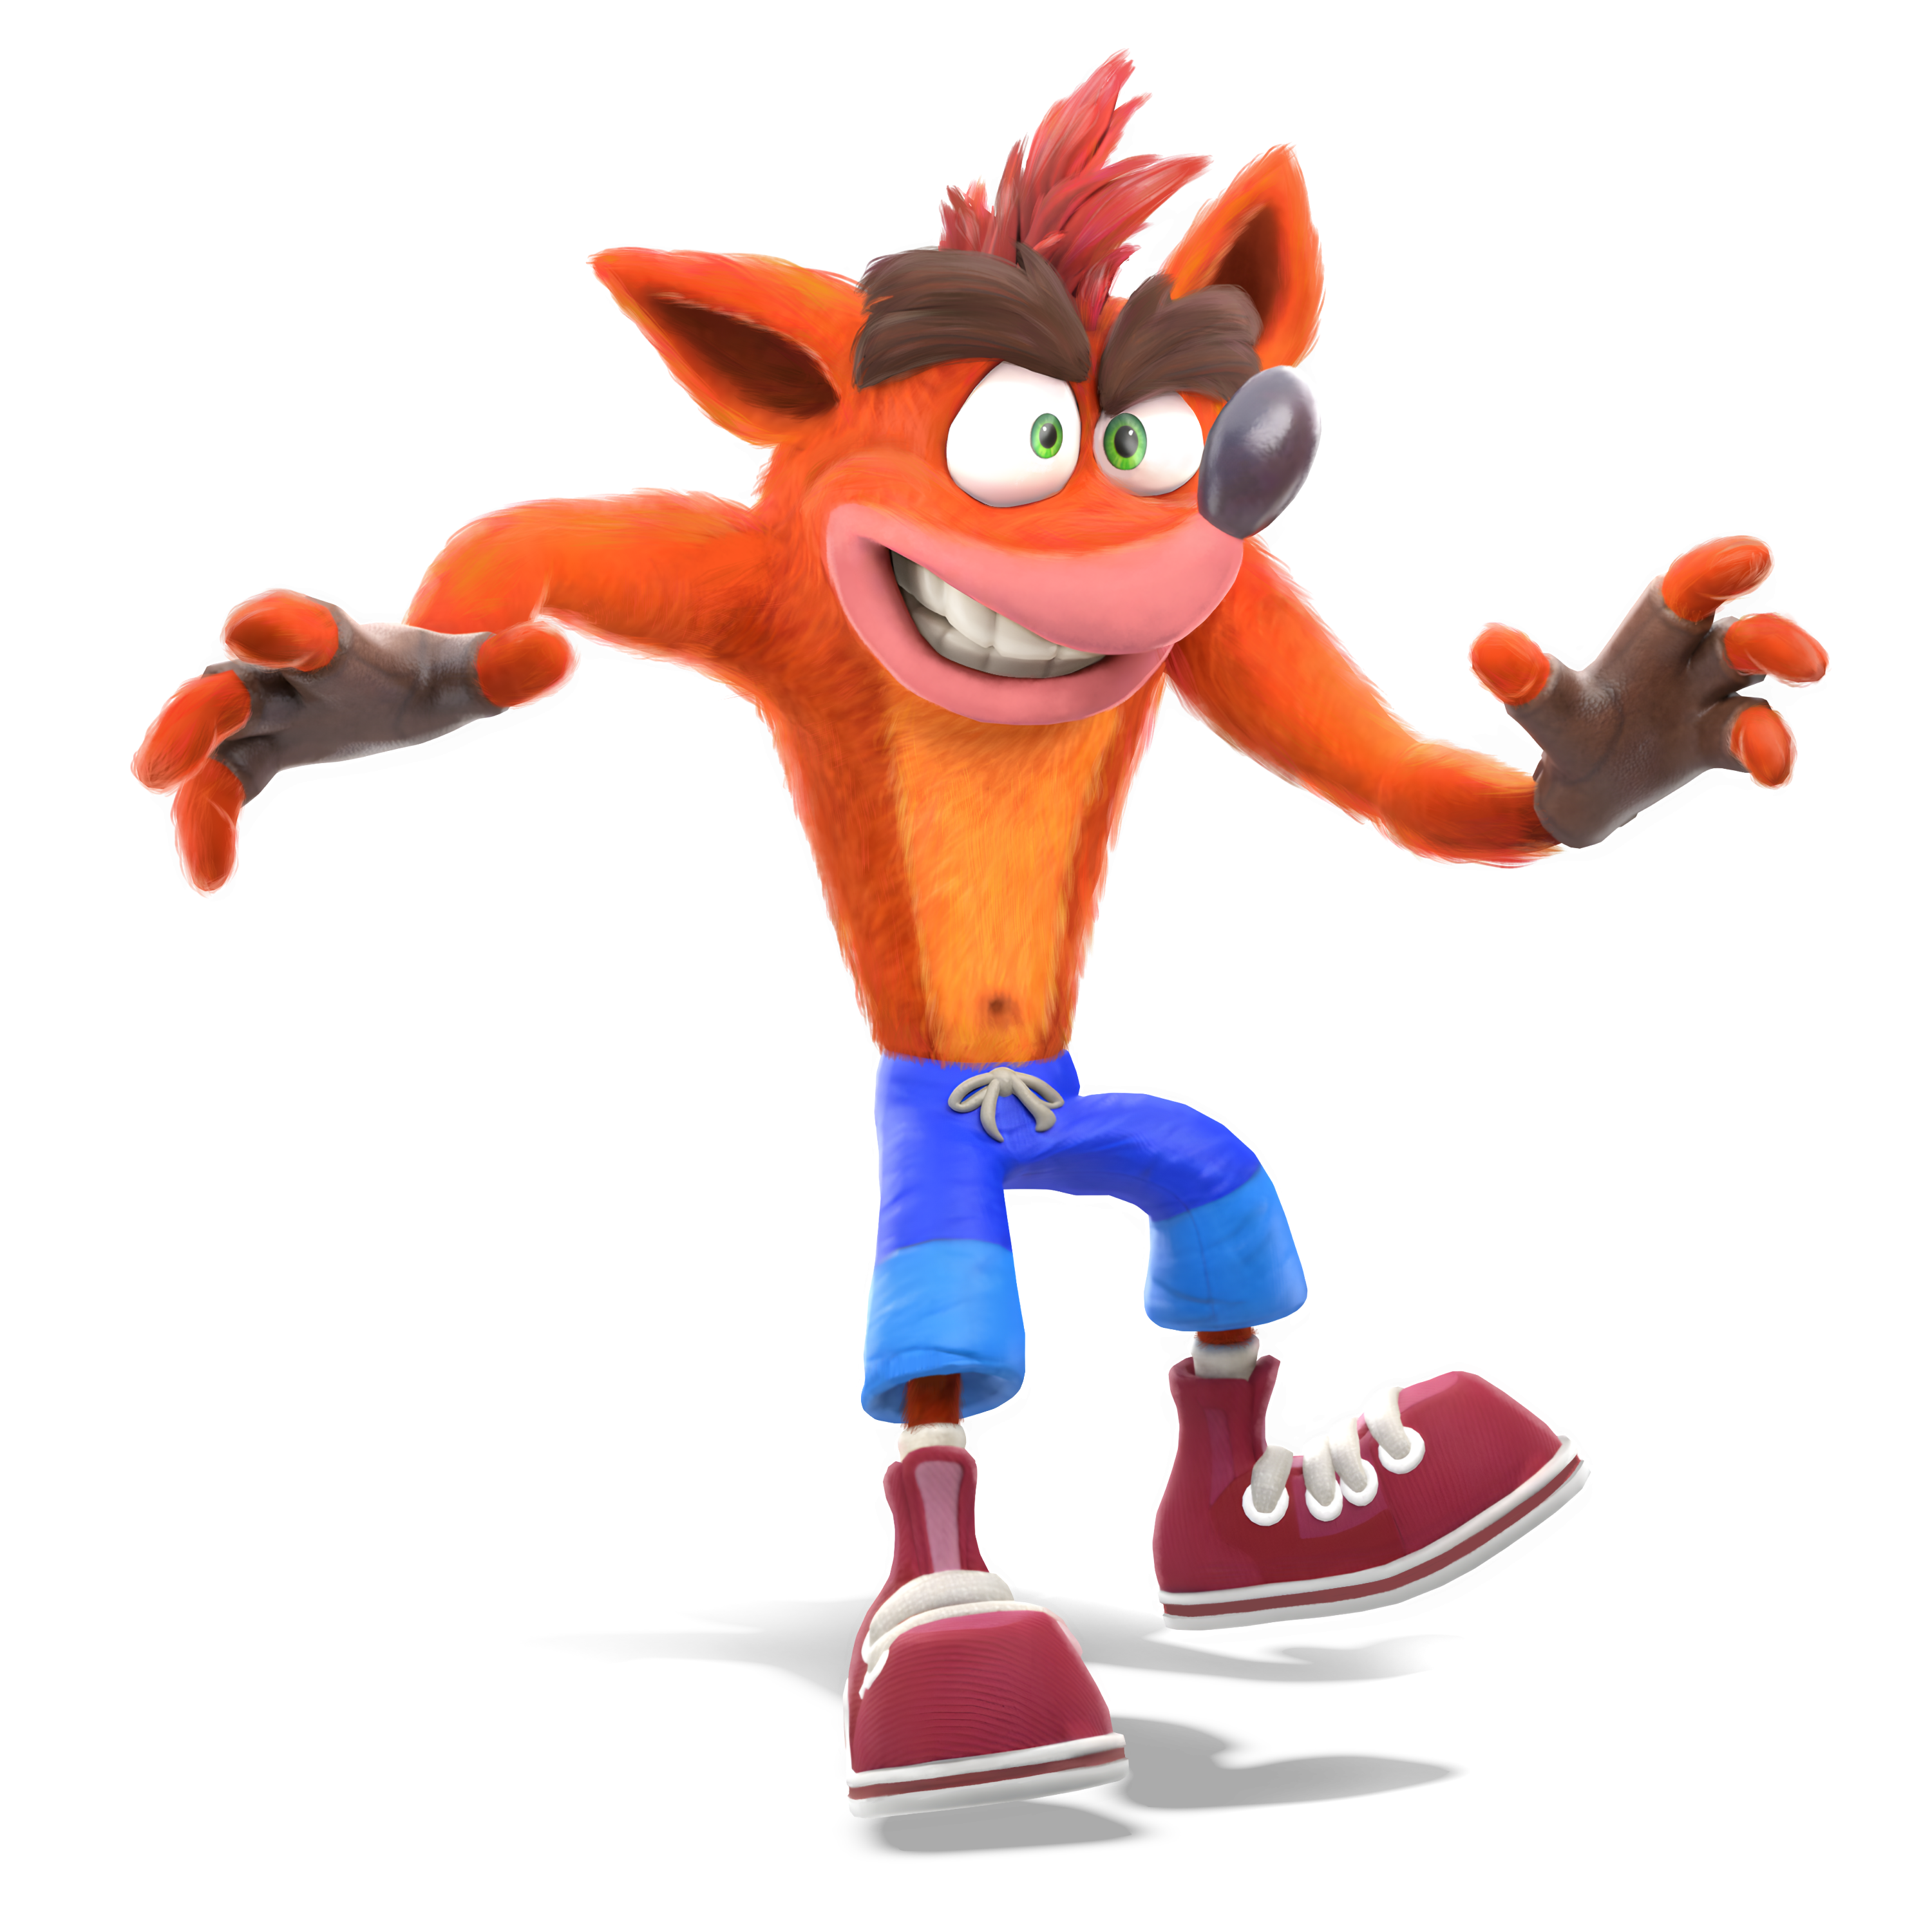 NS OWNER on X: Crash Bandicoot in Super Smash Bros Styles!   / X